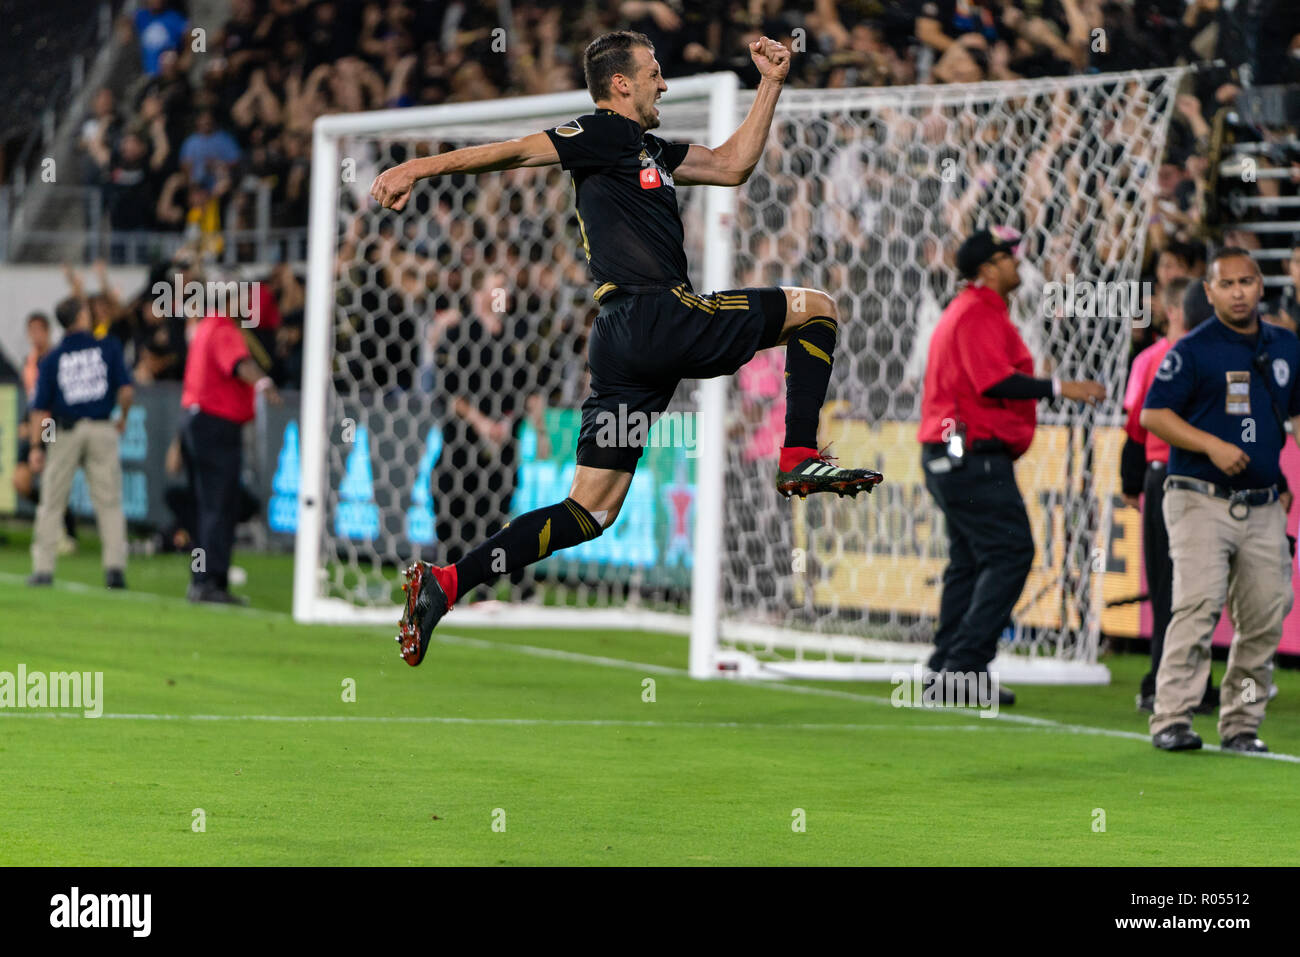 Los Angeles, USA. 1st November 2018. Danilo Silva (6) celebrates in a big way after scoring against Real Salt Lake in their playoff bout. LAFC lost the game 3-2, however. Credit: Ben Nichols/Alamy Live News Stock Photo